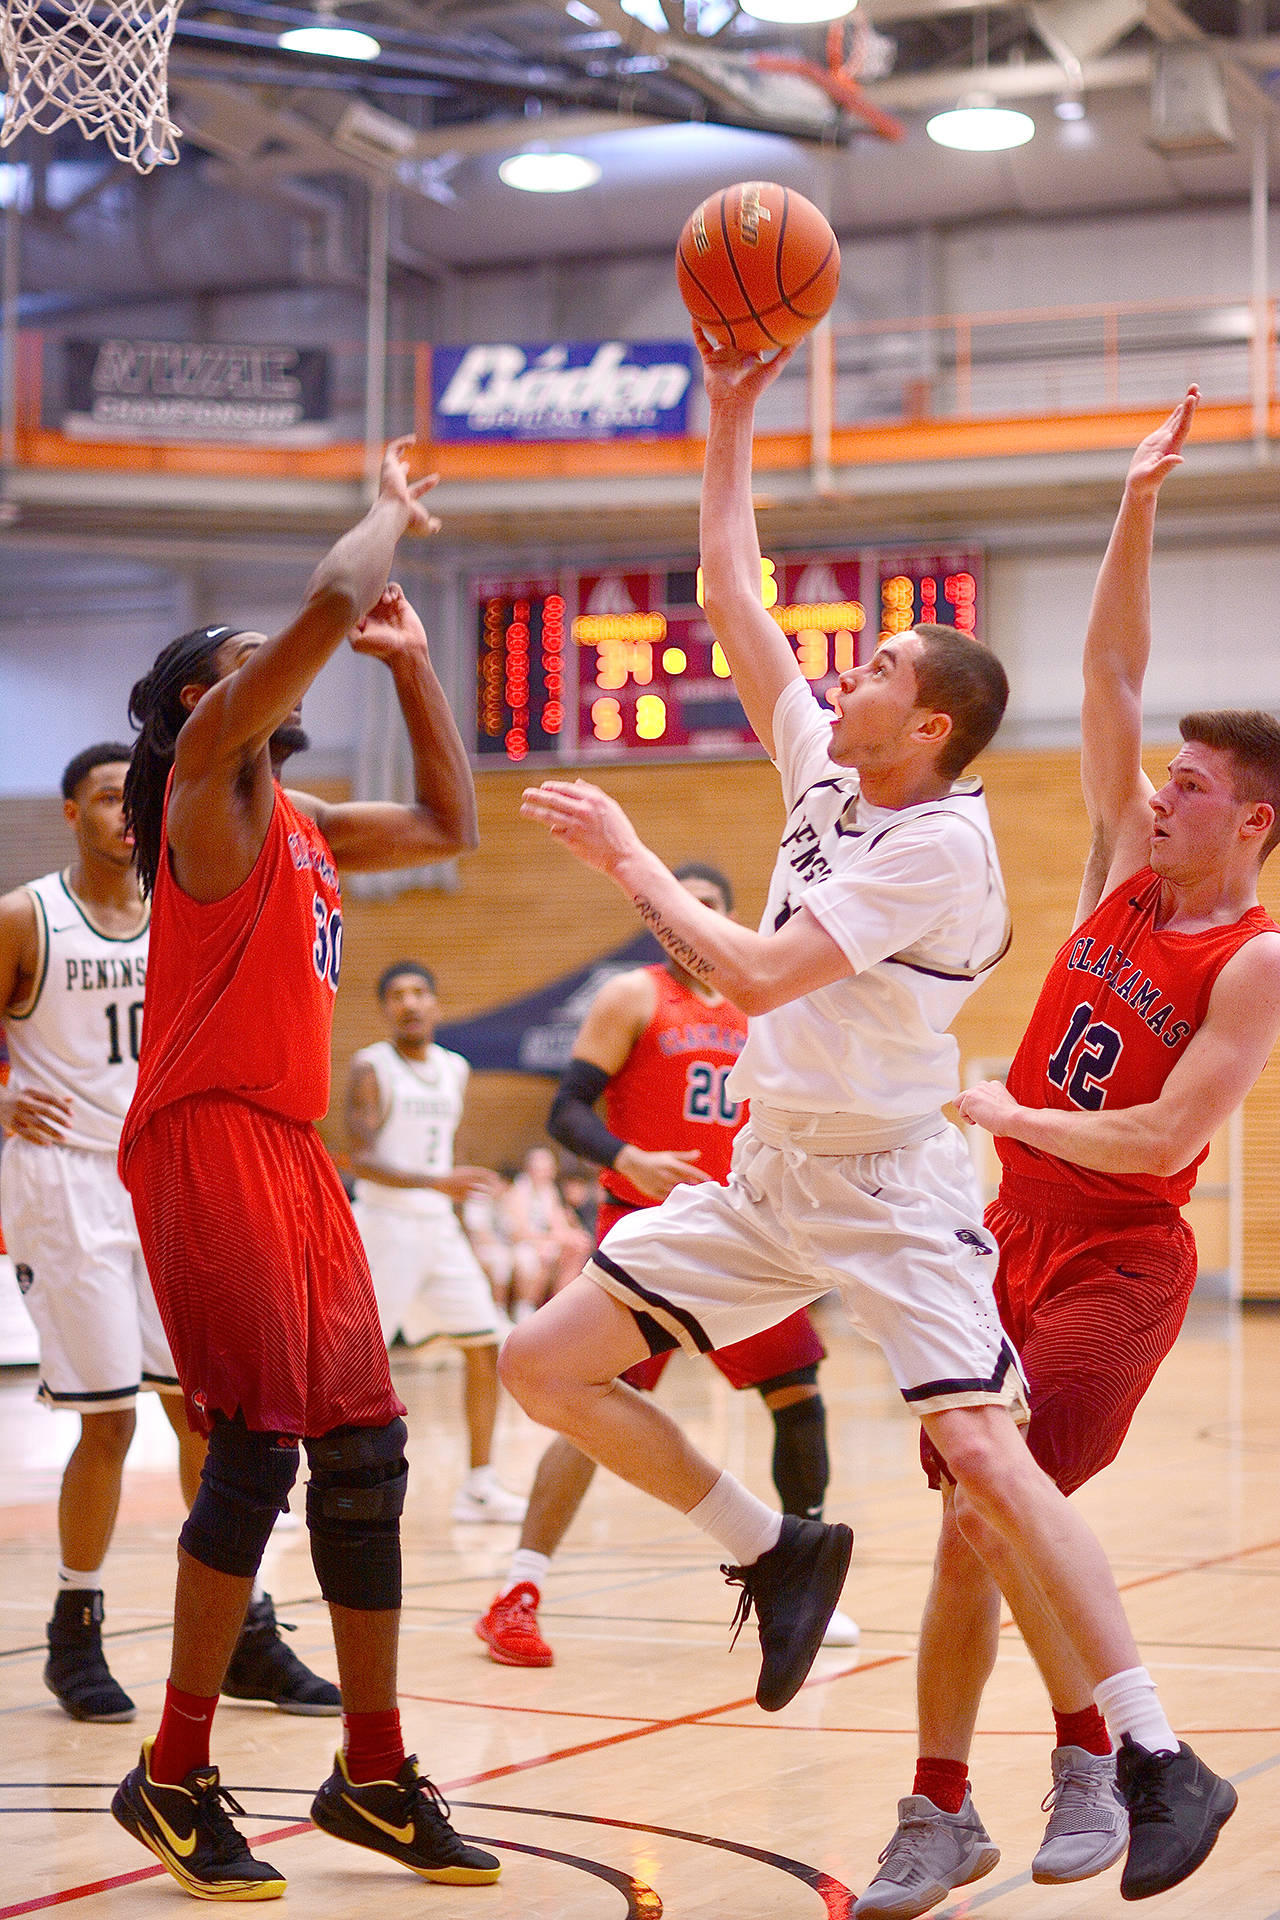 Jay Cline Peninsula’s James Buckley, center, eyes the rim as Clackamas’ Isaiah Gentry, left, and Briggs Young defend during the Pirates win Saturday at the NWAC Men’s Basketball Championships at Everett Community College.